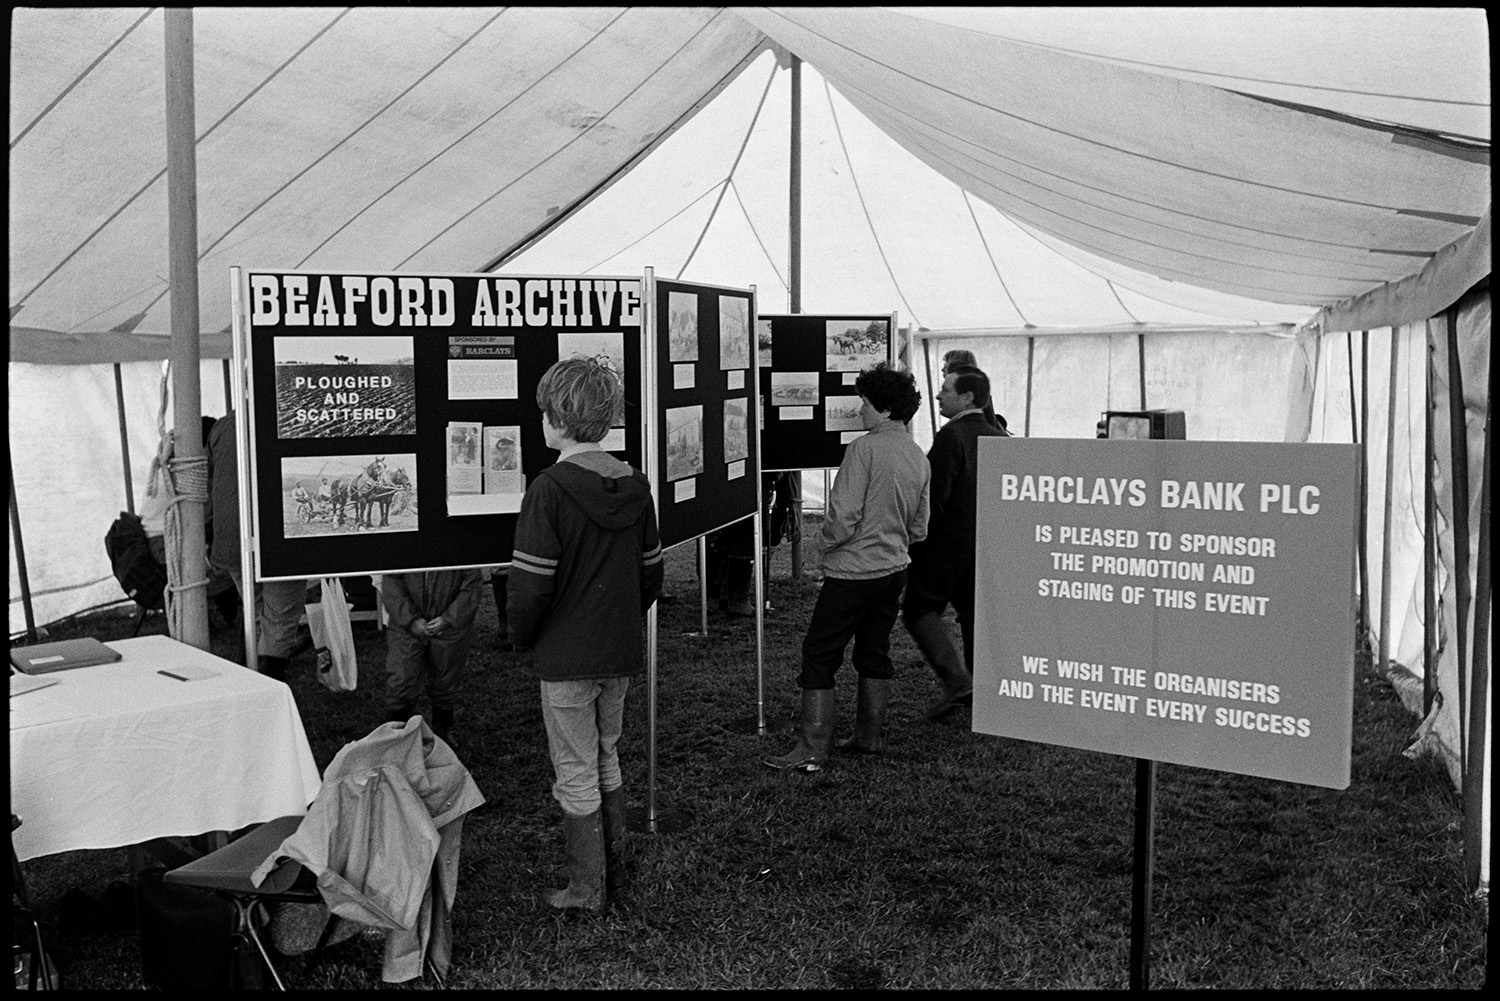 Agricultural show, prize sheep exhibition, TV  tent.
[Visitors to the Beaford Archive exhibition in a marquee at the North Devon Show in Alverdiscott. Exhibition display boards with photographs and a Barclays Bank sponsorship sign are visible.]